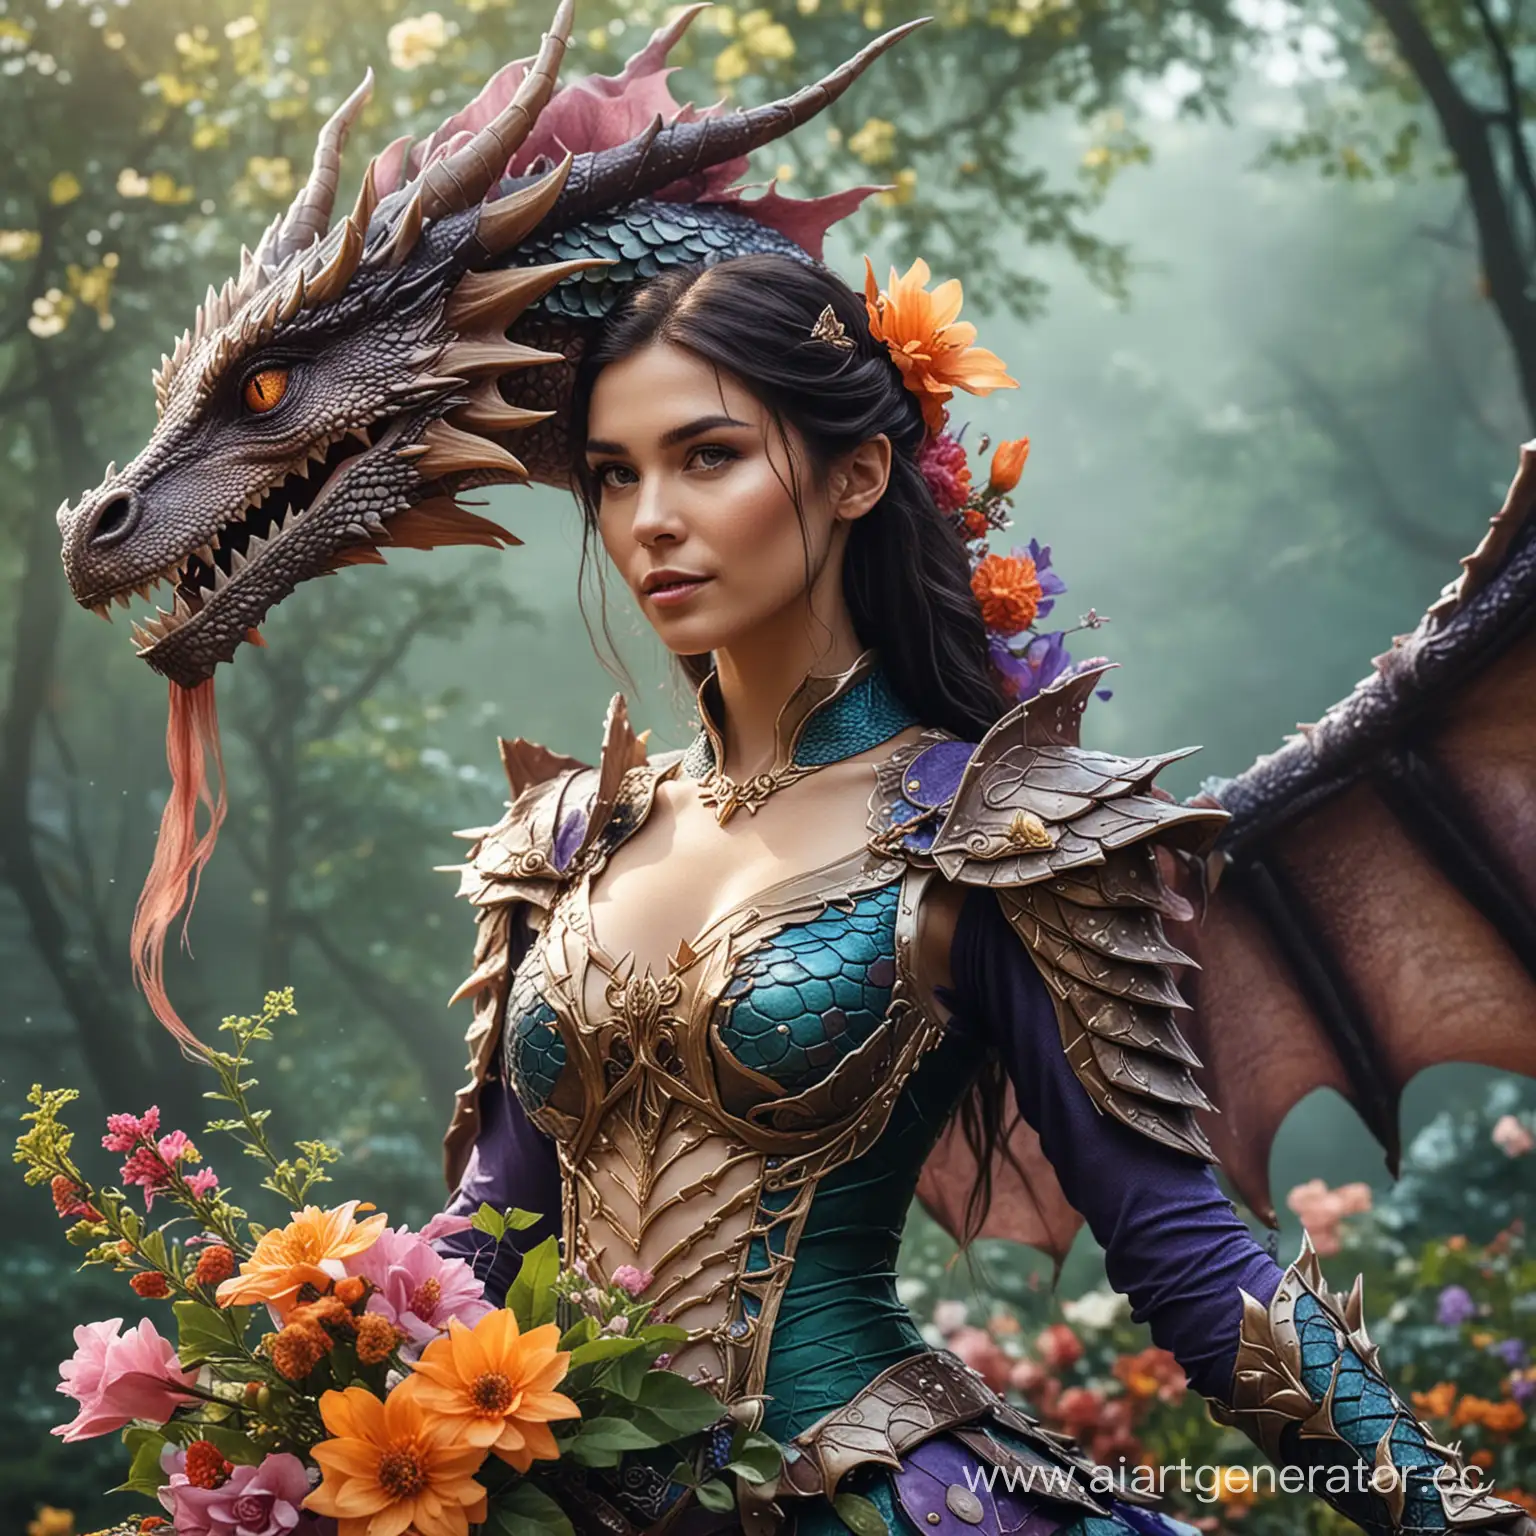 Fantasy-Dragon-Costume-Woman-with-Floral-Accents